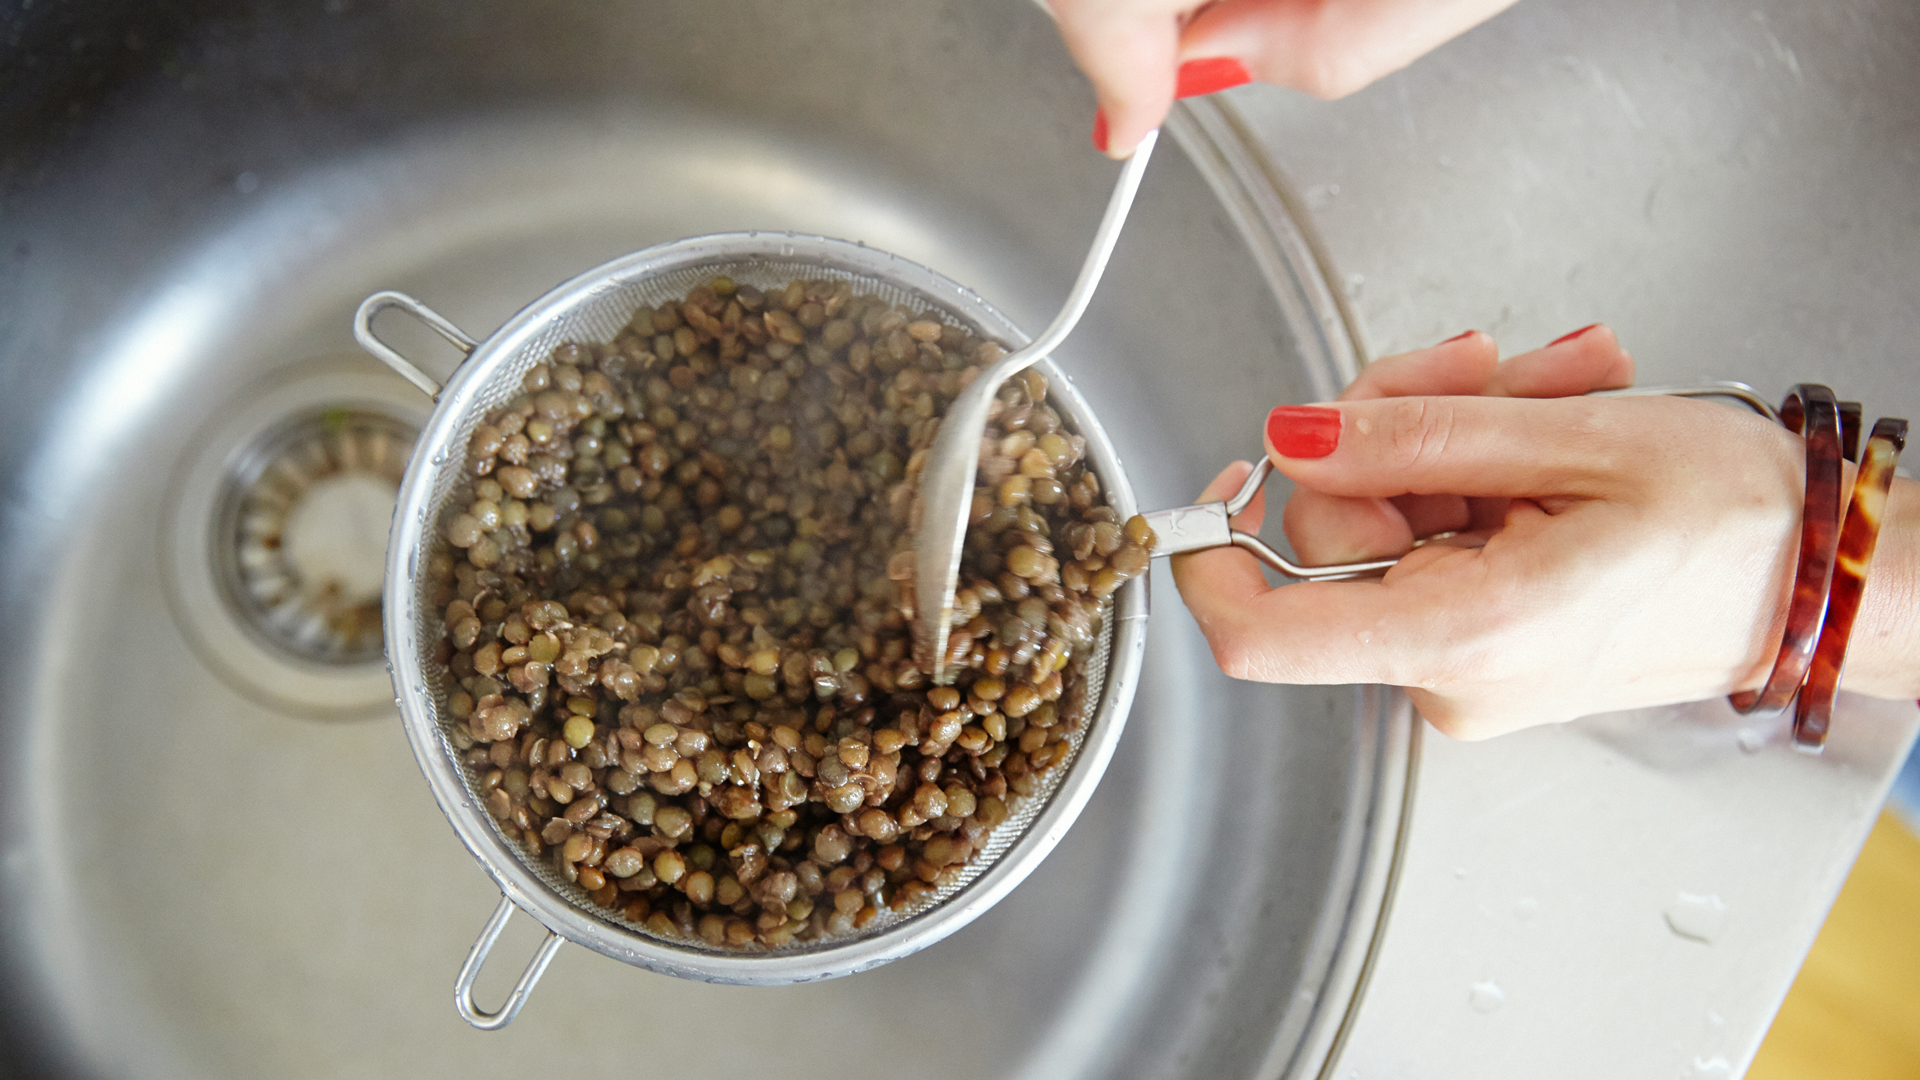 catherine-cuello-drains-lentils-for-her-french-lentils-and-a-ton-of-herbs-recipe-foodadit